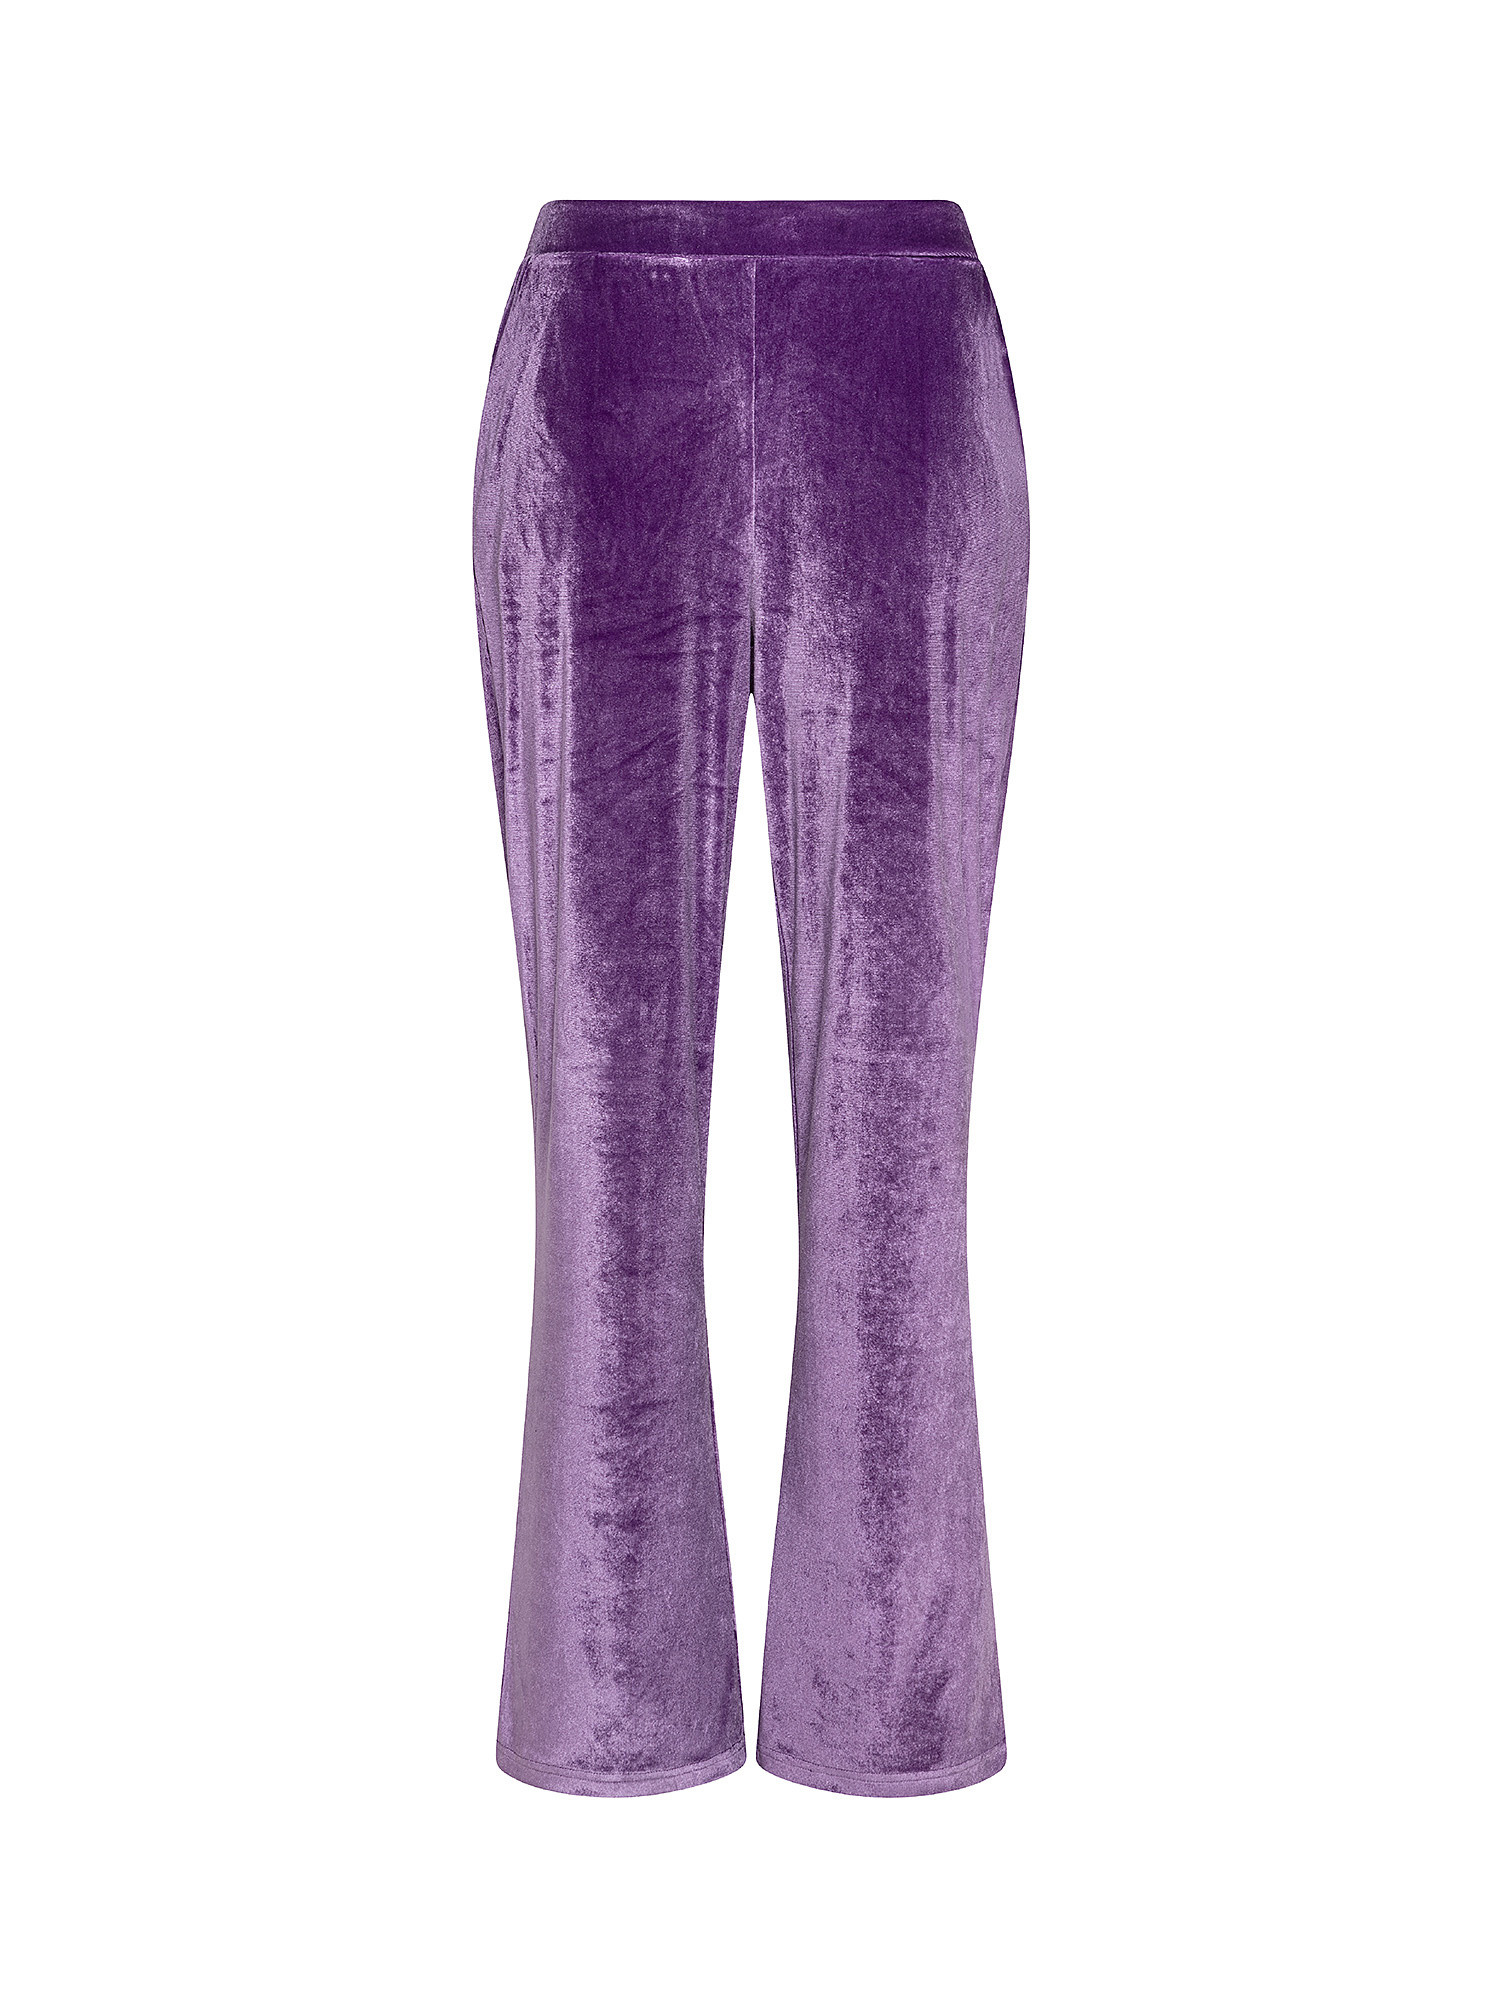 Velor trousers, Purple, large image number 0